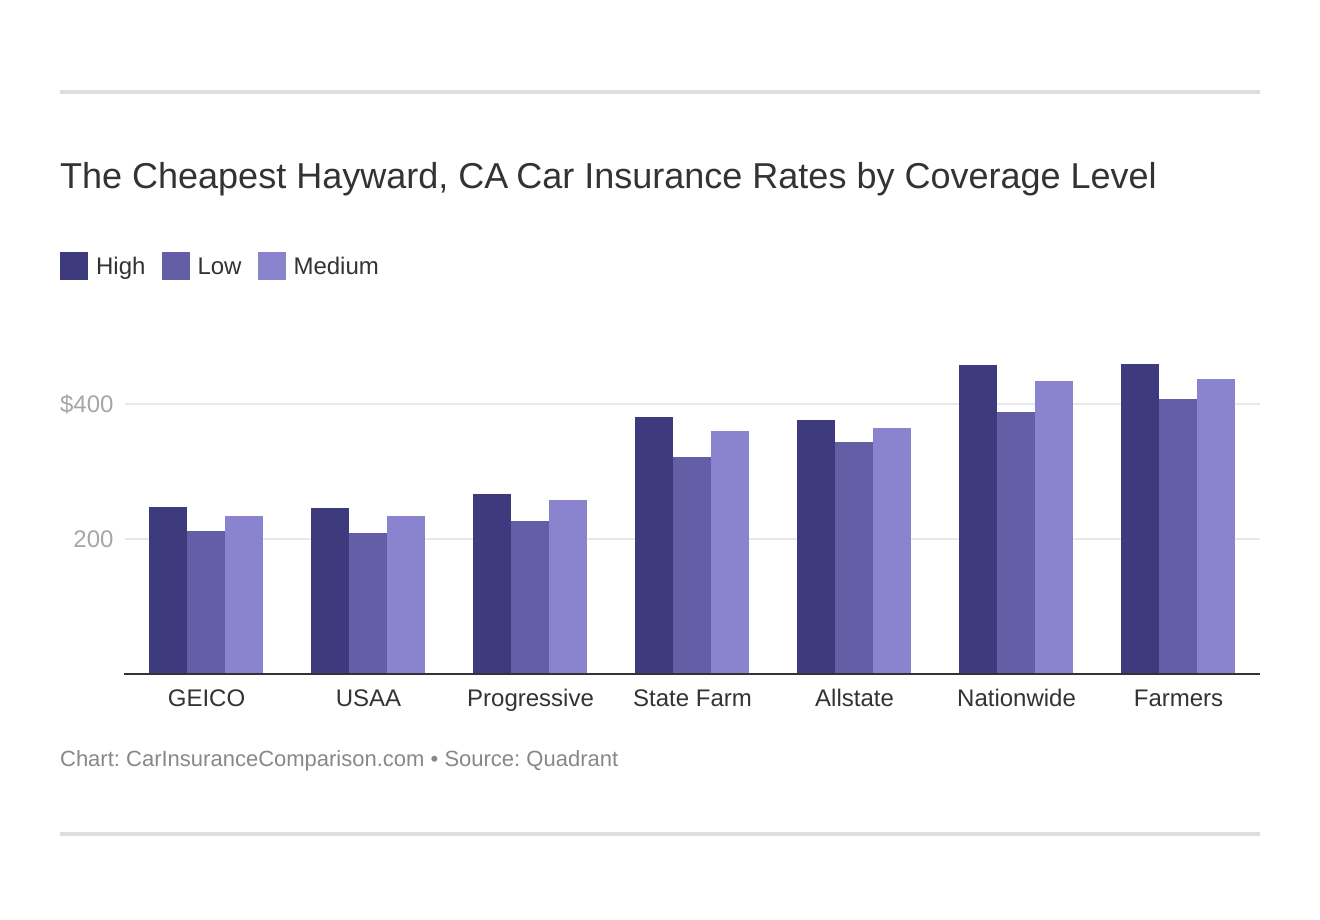 The Cheapest Hayward, CA Car Insurance Rates by Coverage Level